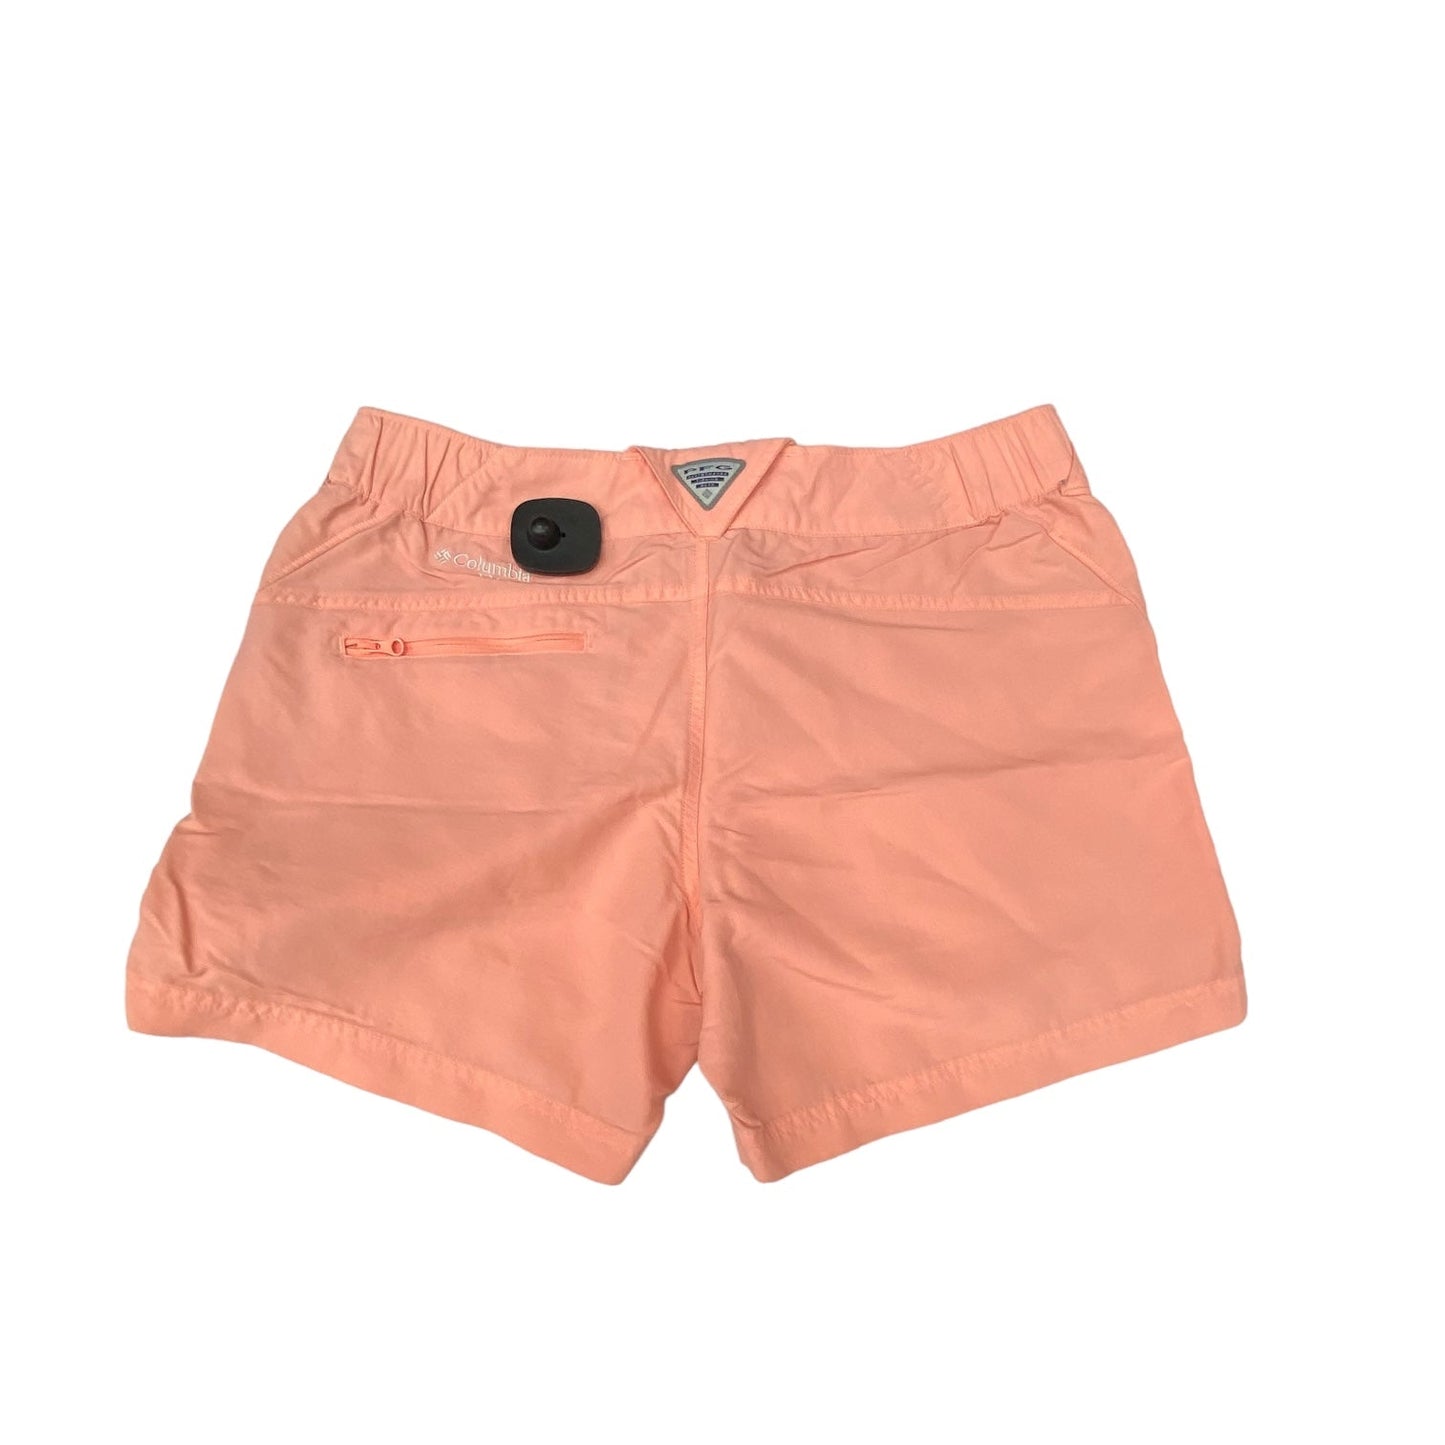 Athletic Shorts By Columbia  Size: M